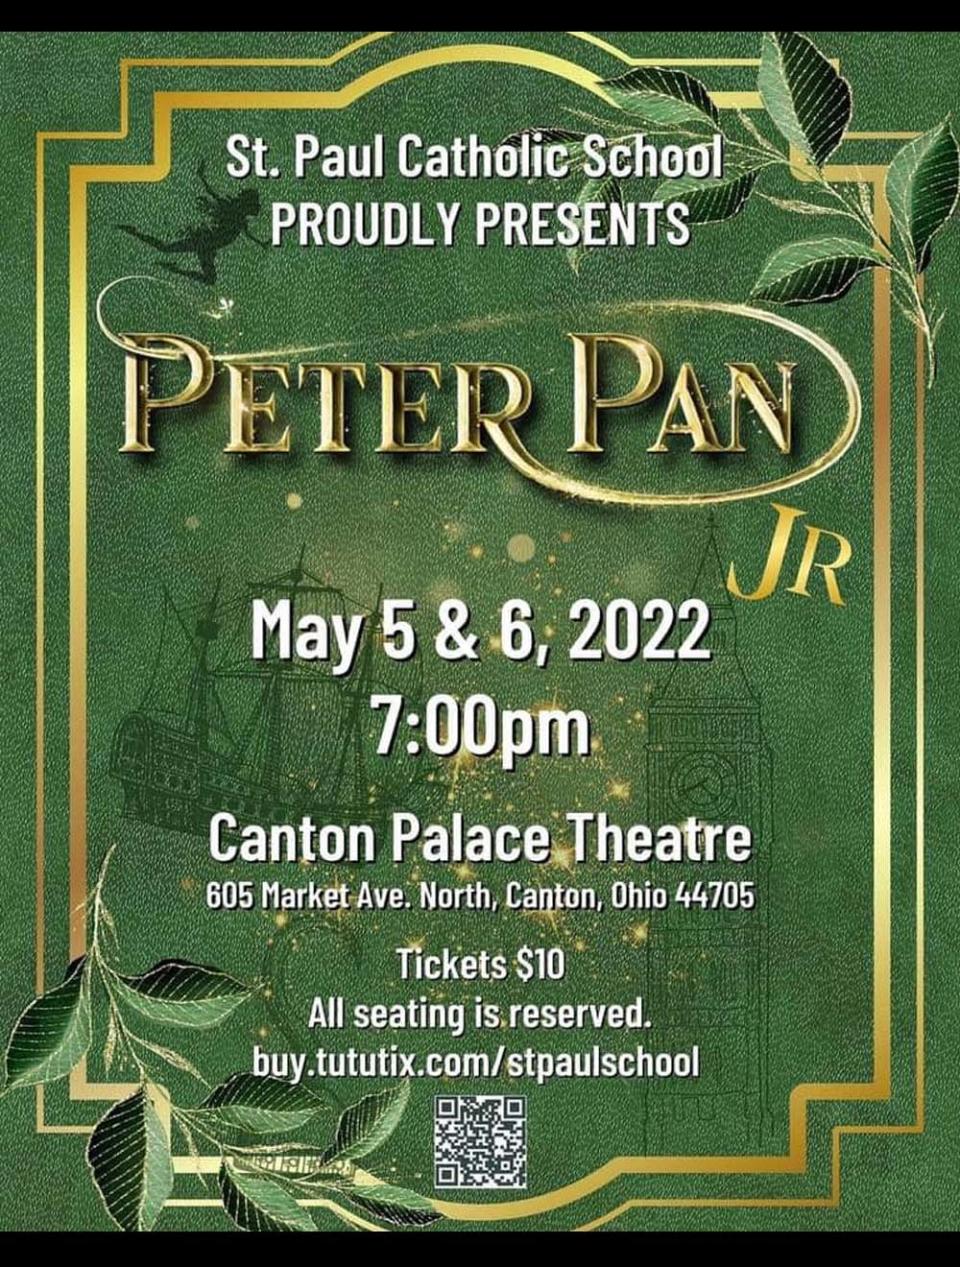 Peter Pan Jr. will be performed by St. Paul Catholic School at 7 p.m. on Thursday and Friday at Canton Palace Theatre. Tickets are $10.